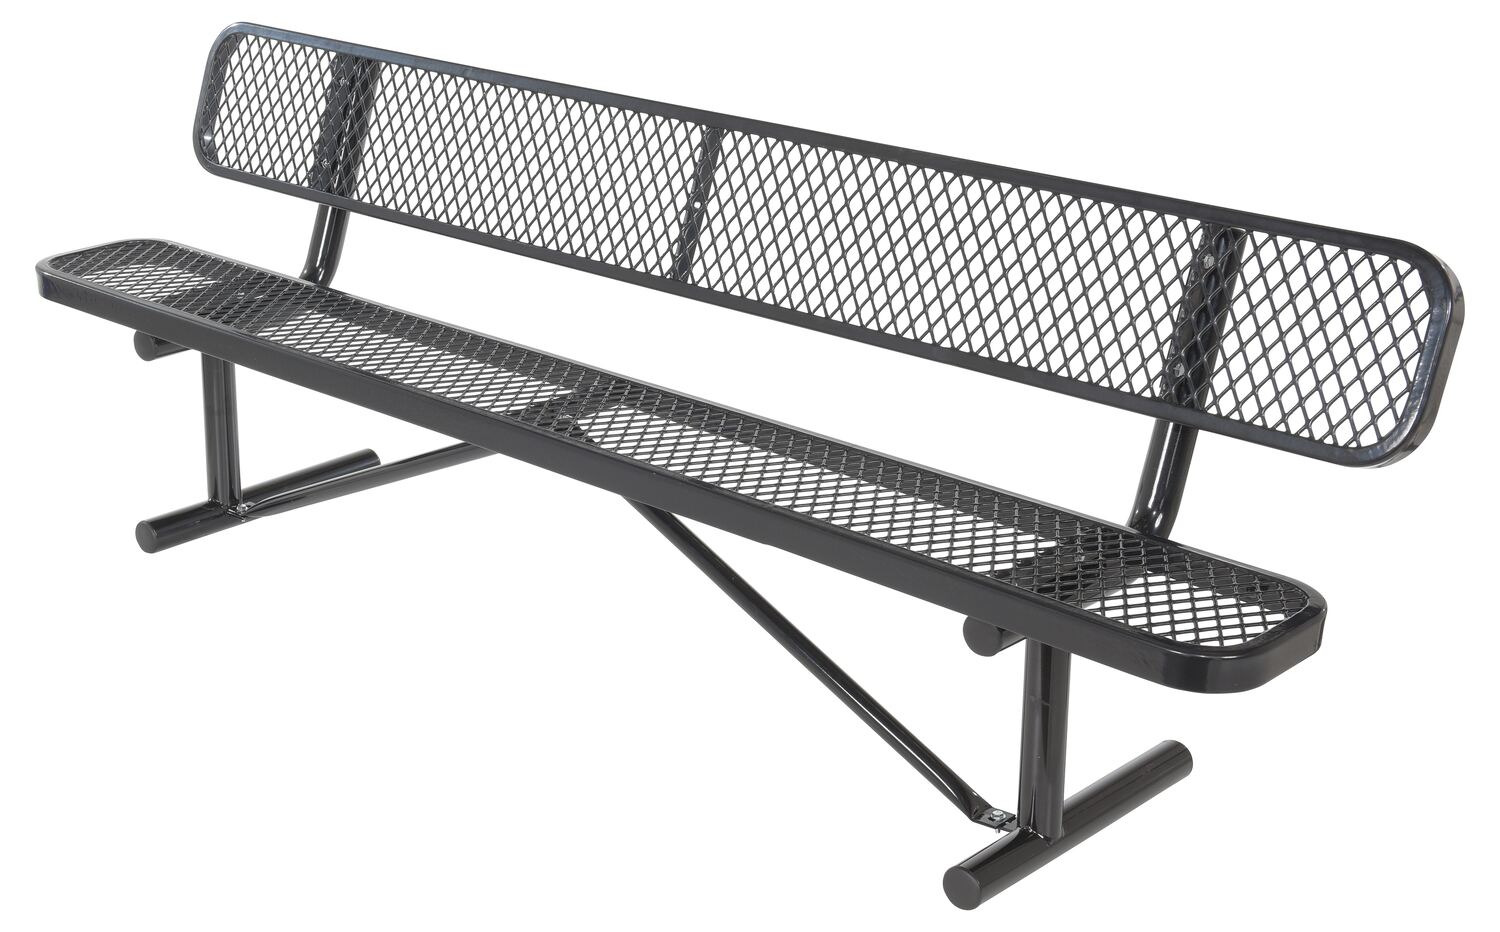 Benches - Steel Mesh (BEN-MX) - Product Family Page